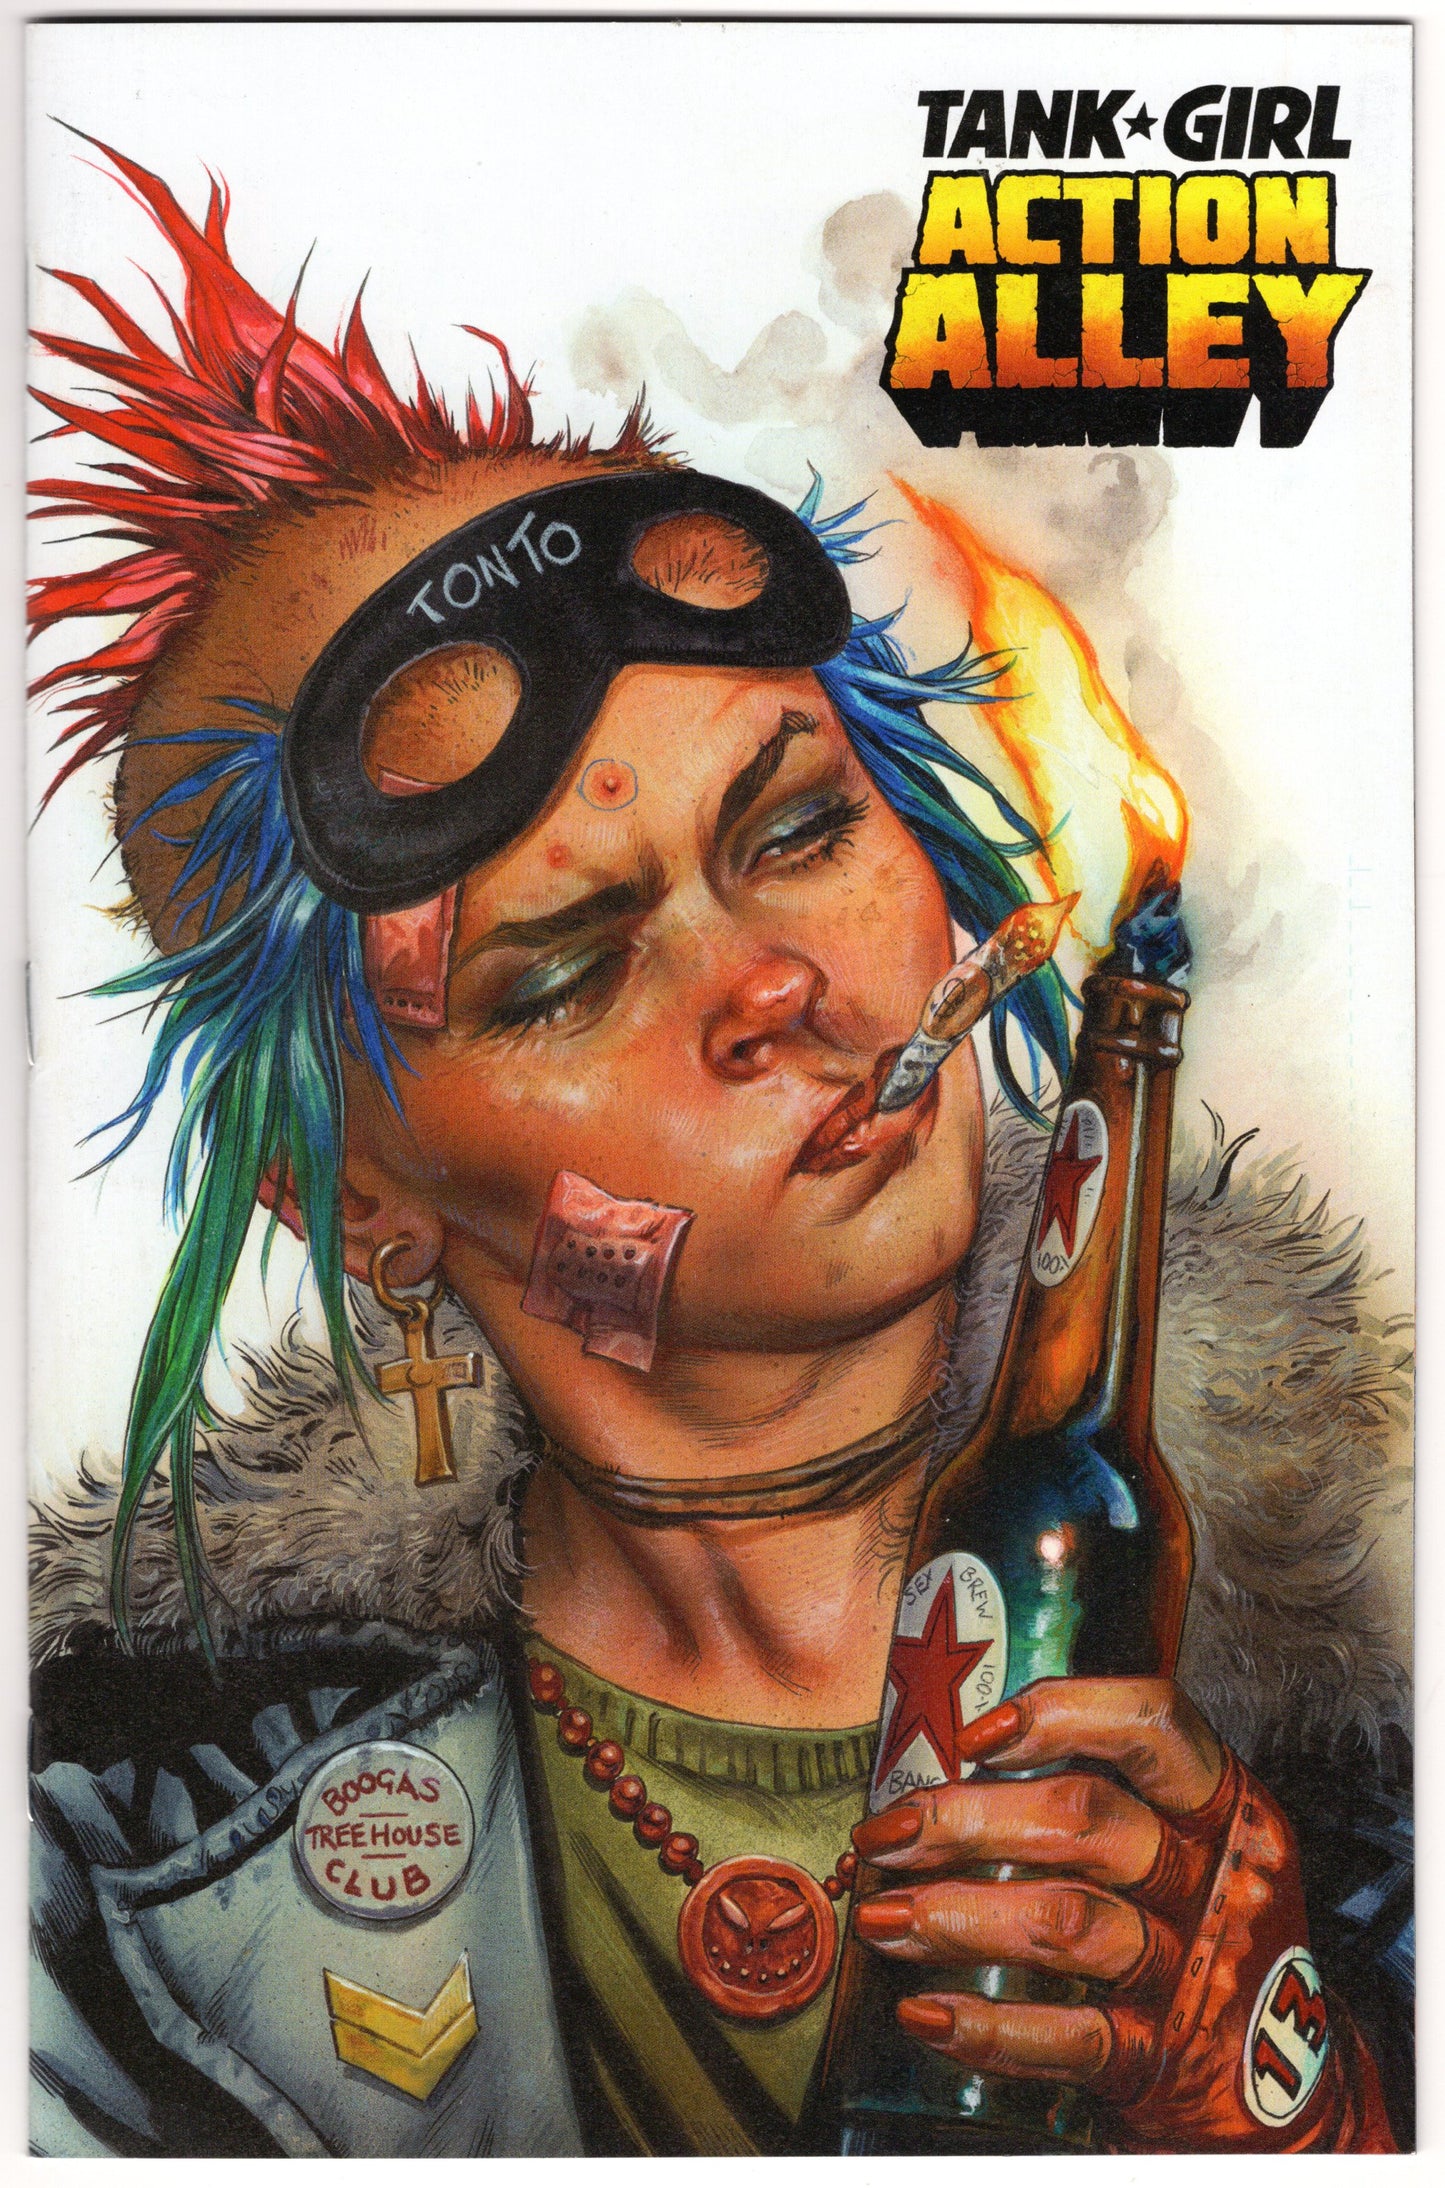 Tank Girl Action Alley - Issue #1 "Fiona Staples Variant Cover" (Jan. 2019 - Titan Comics) NM